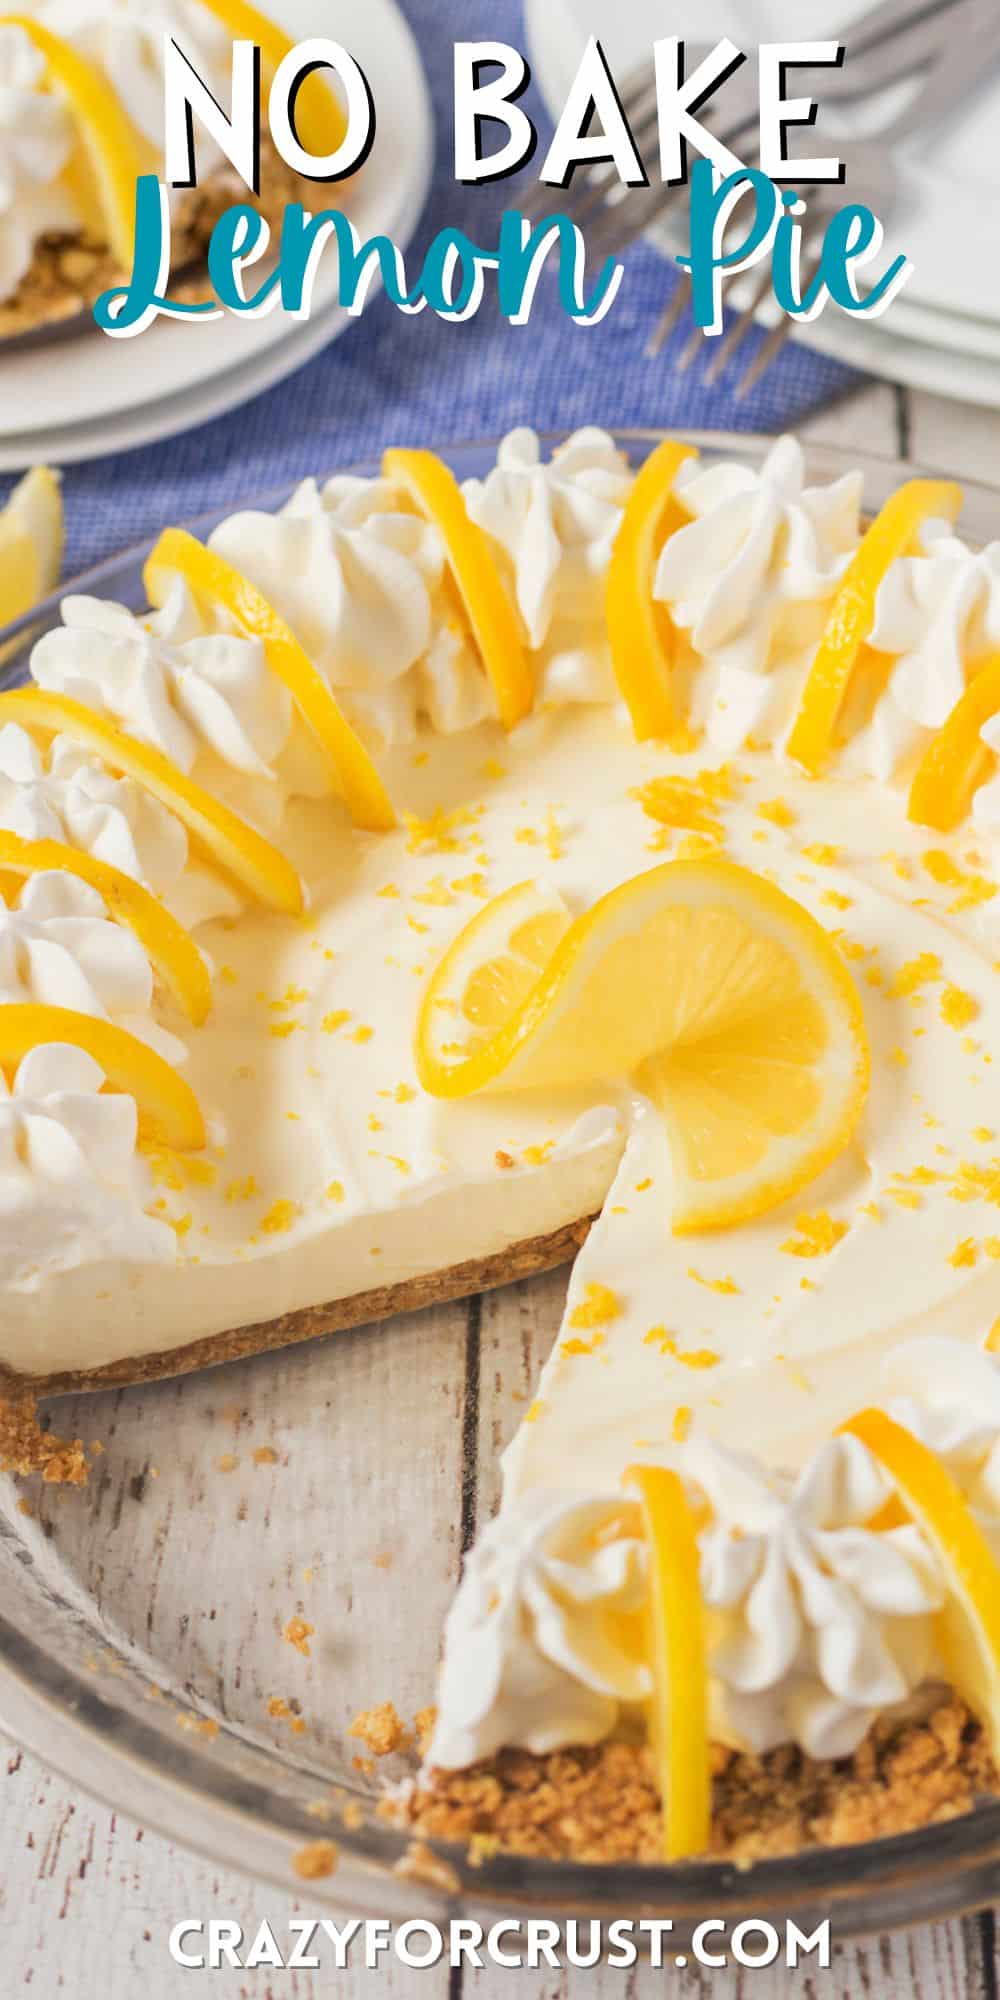 lemon pie with lemon slices and whipped cream on top with words on the image.